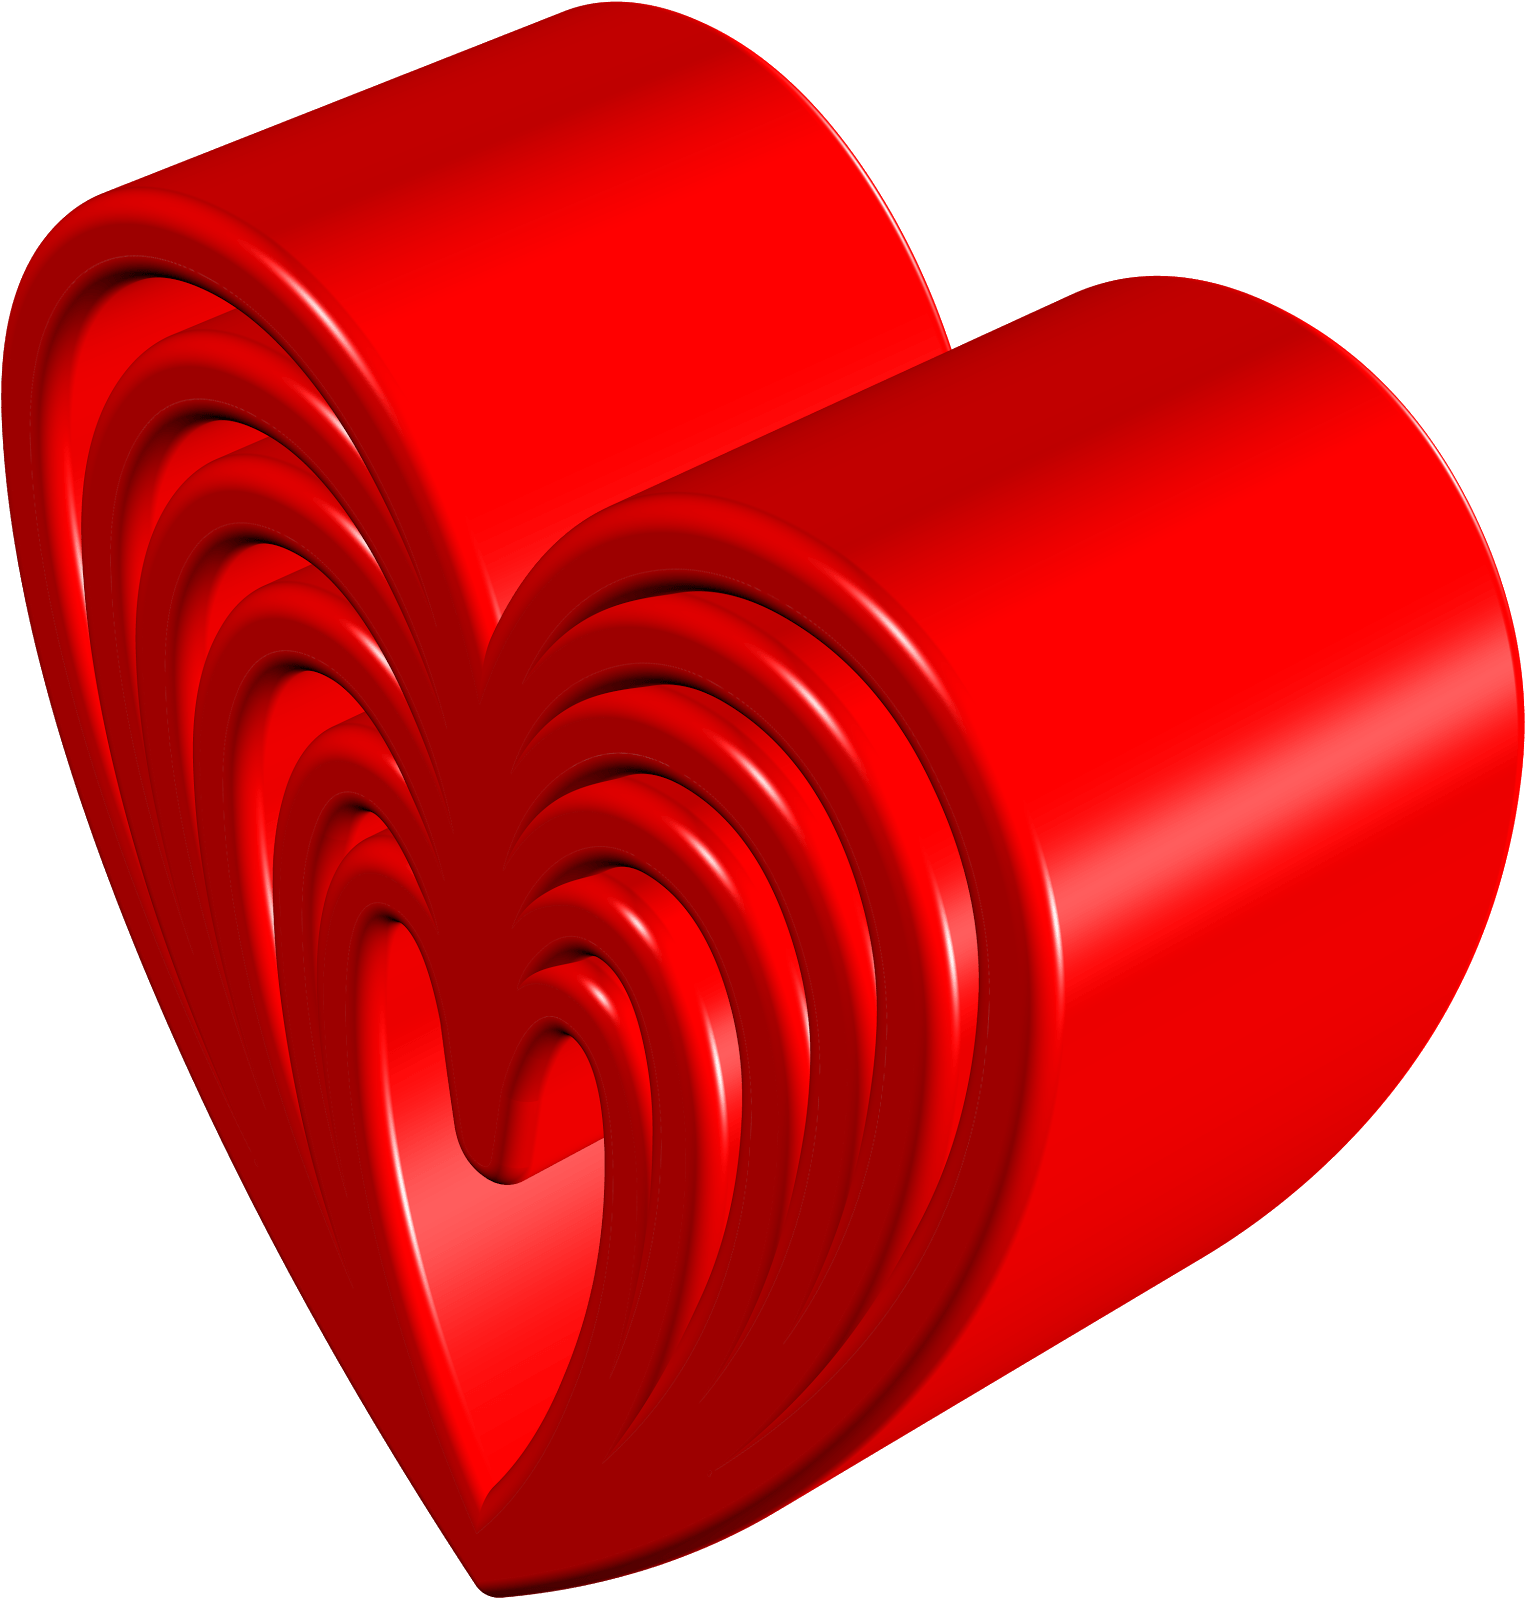 Love 3D Wallpaper Heart Red Colour With Messages